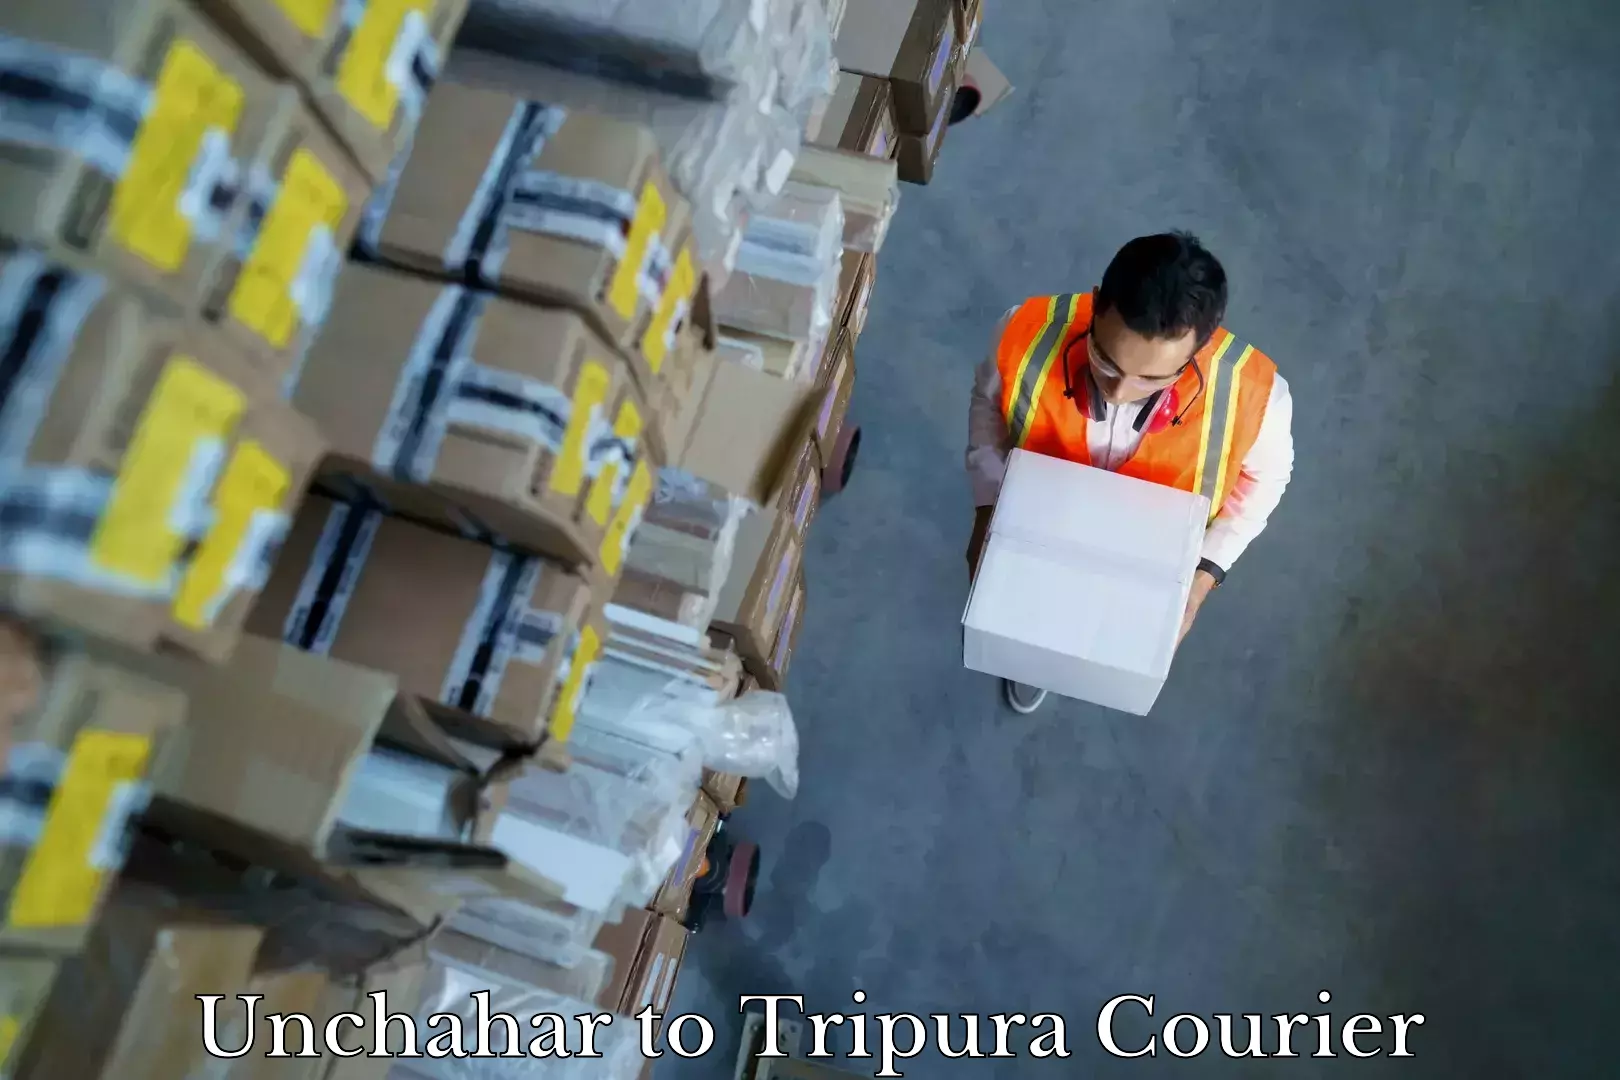 Professional relocation services Unchahar to Udaipur Tripura